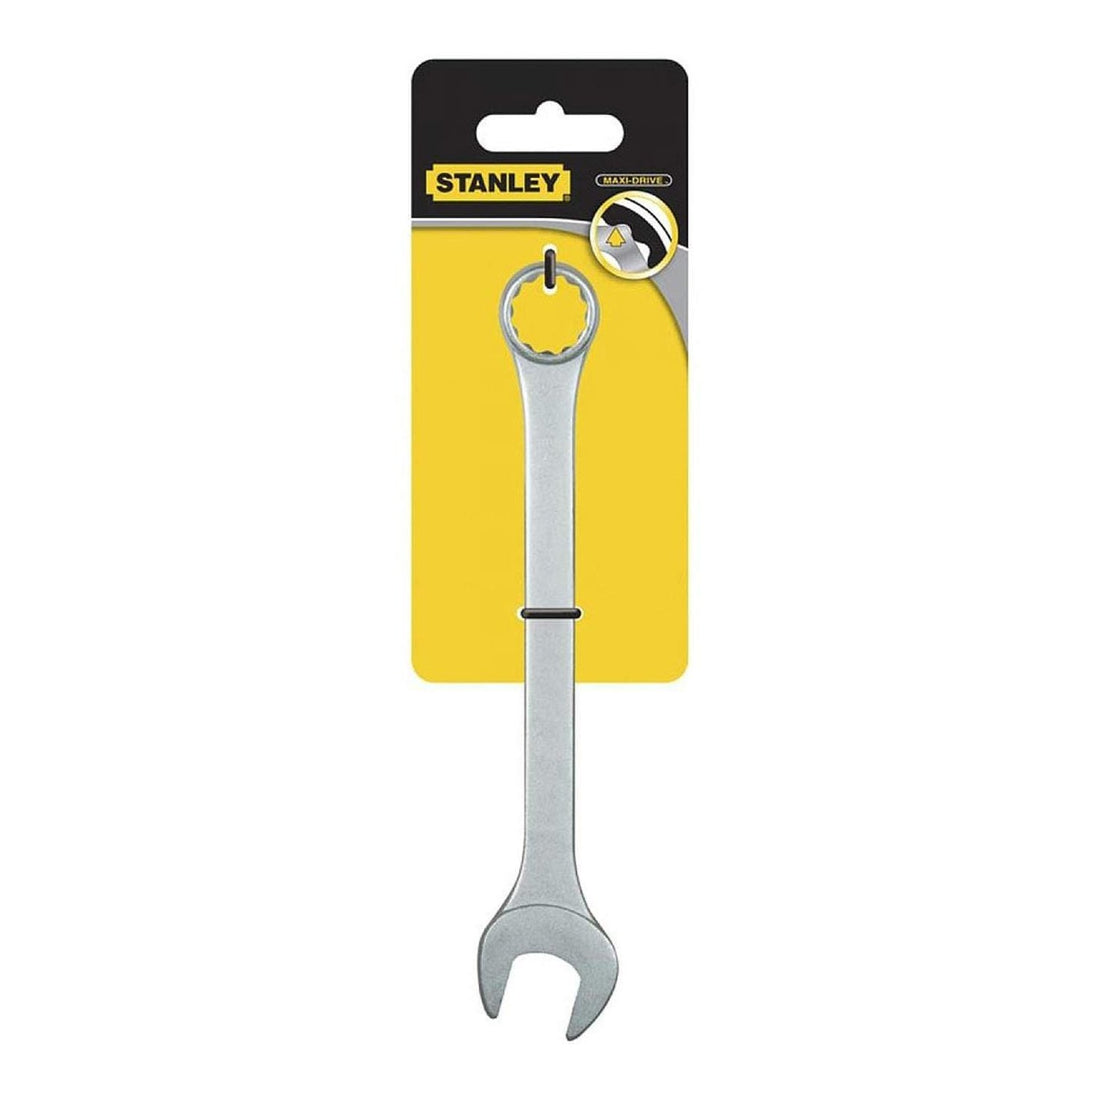 Stanley 17mm Combination Wrench - STMT72814-8 | Supply Master, Accra, Ghana Wrenches Buy Tools hardware Building materials